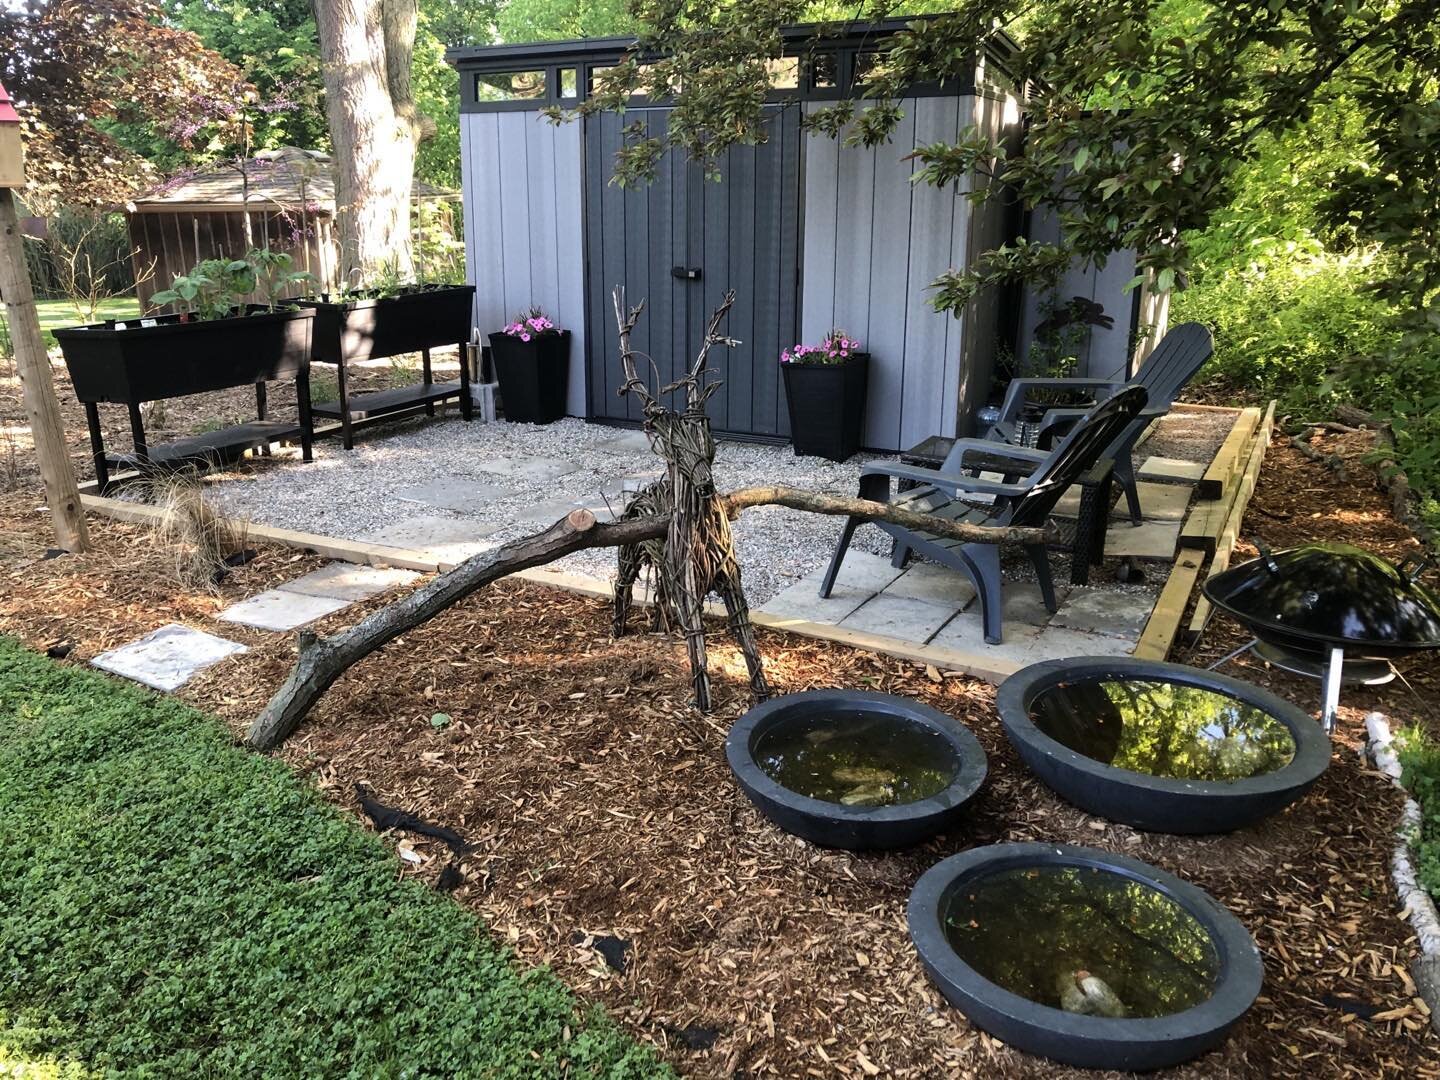 Thinking about buying a new shed? Not sure what to buy?  Looking for some tips? Check out my newest post outlining the reason I broke from the traditional wood shed and went with this contemporary resin design in our woodland garden. For the complete